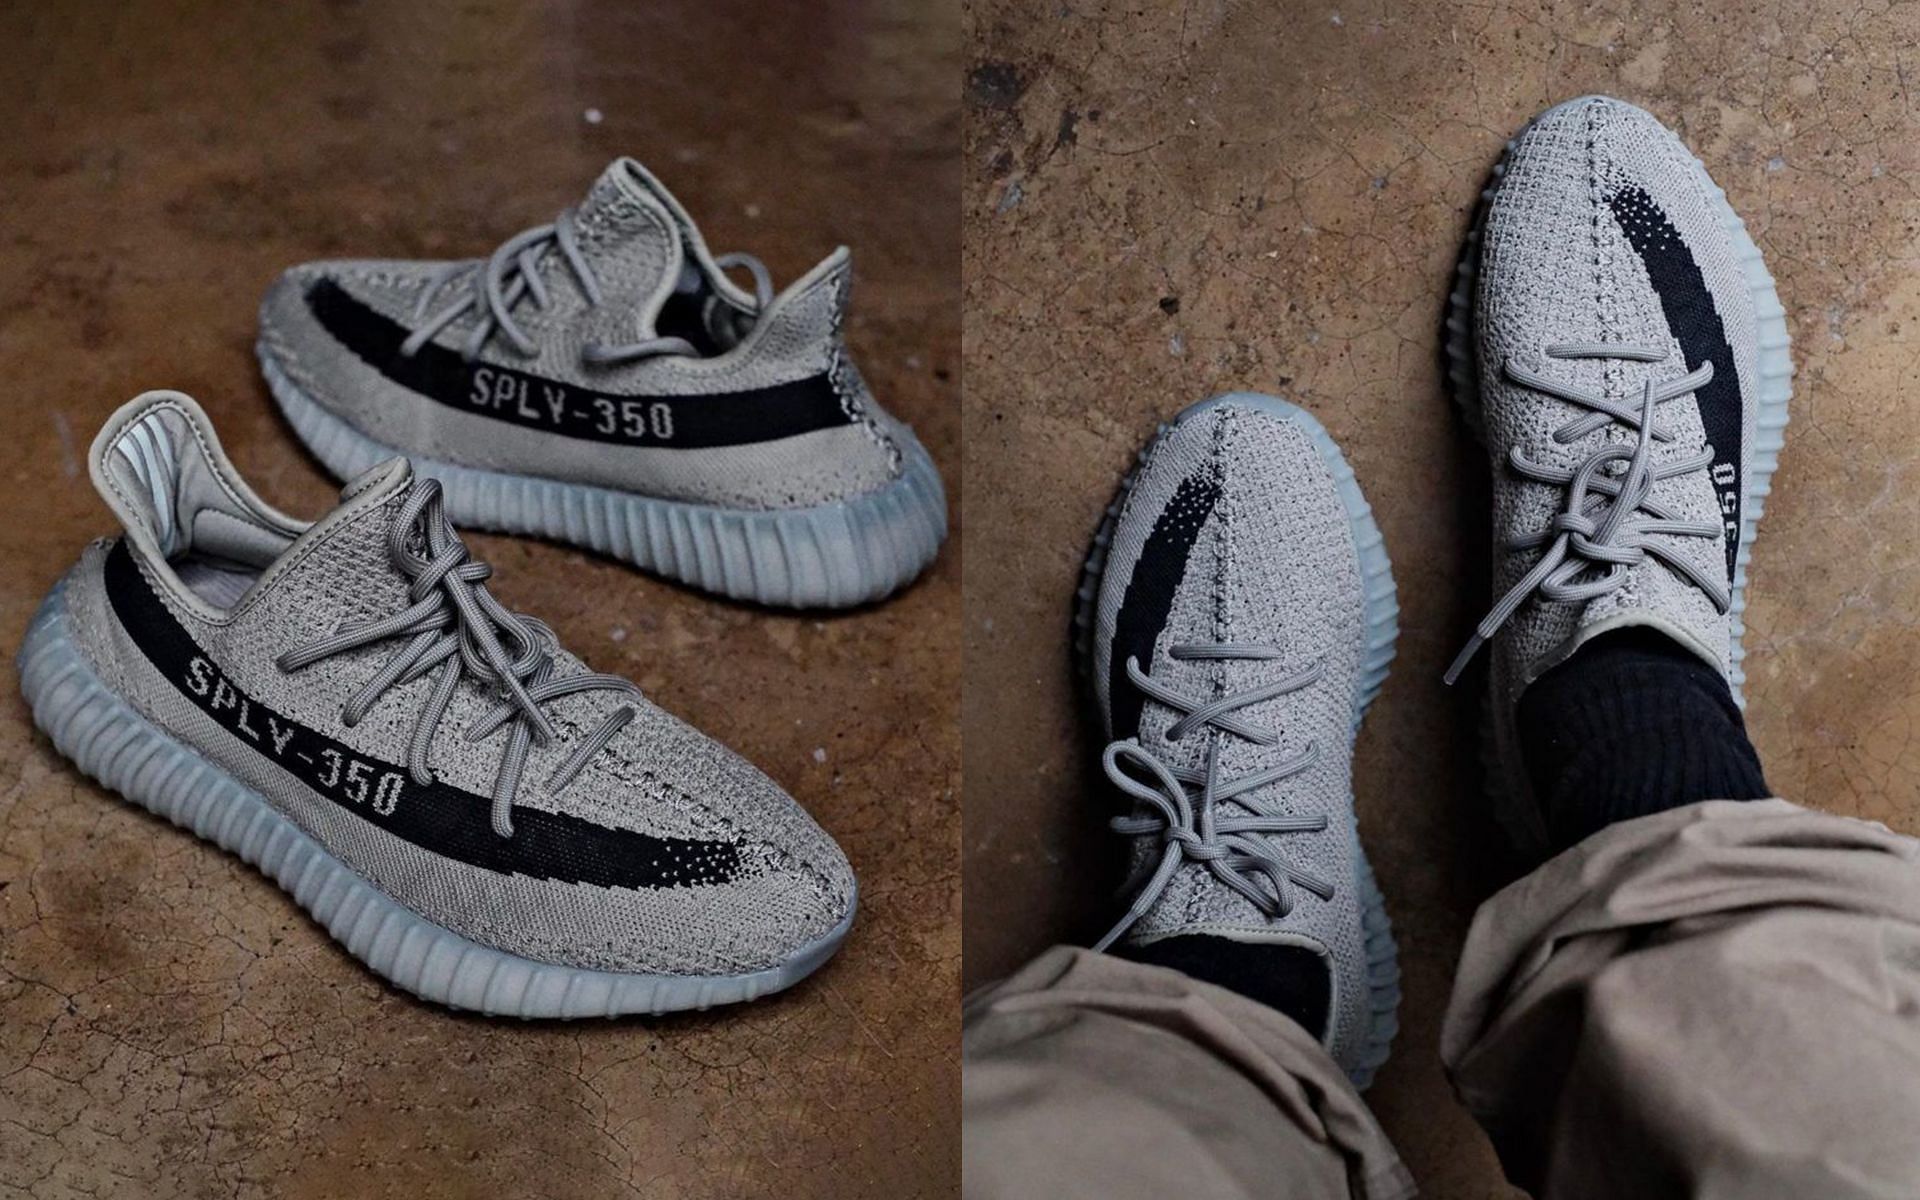 Where to buy Adidas Yeezy BOOST 350 V2 Granite shoes? Price and details explored